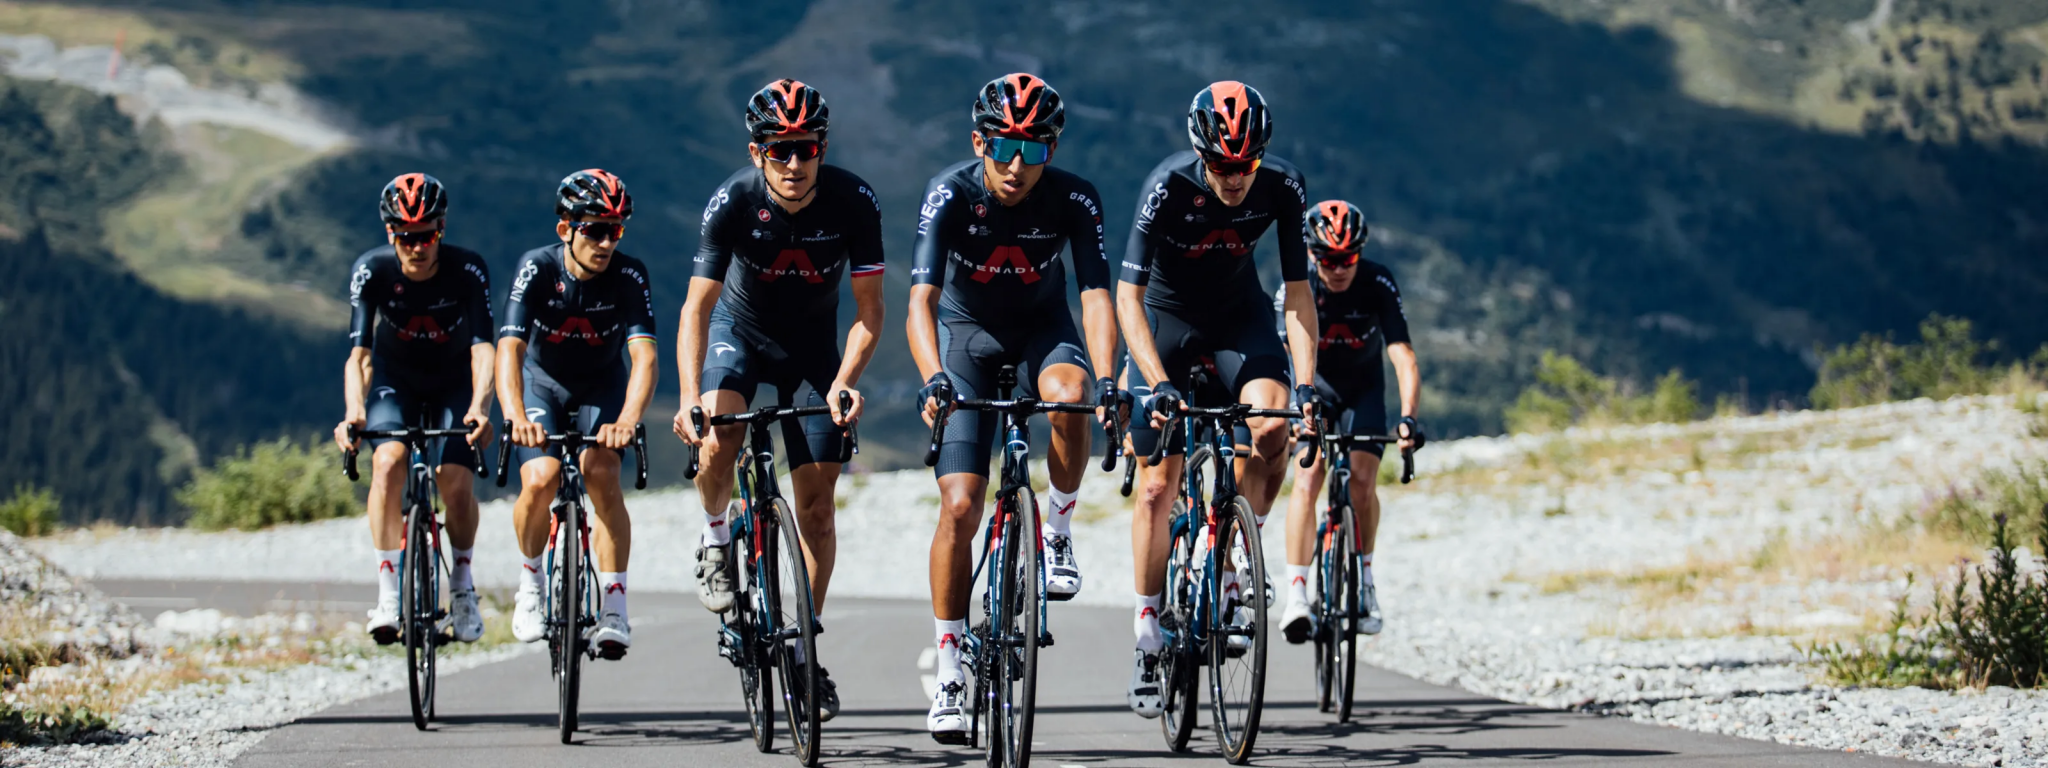 Ineos Grenadiers officially launched prior to Tour de France